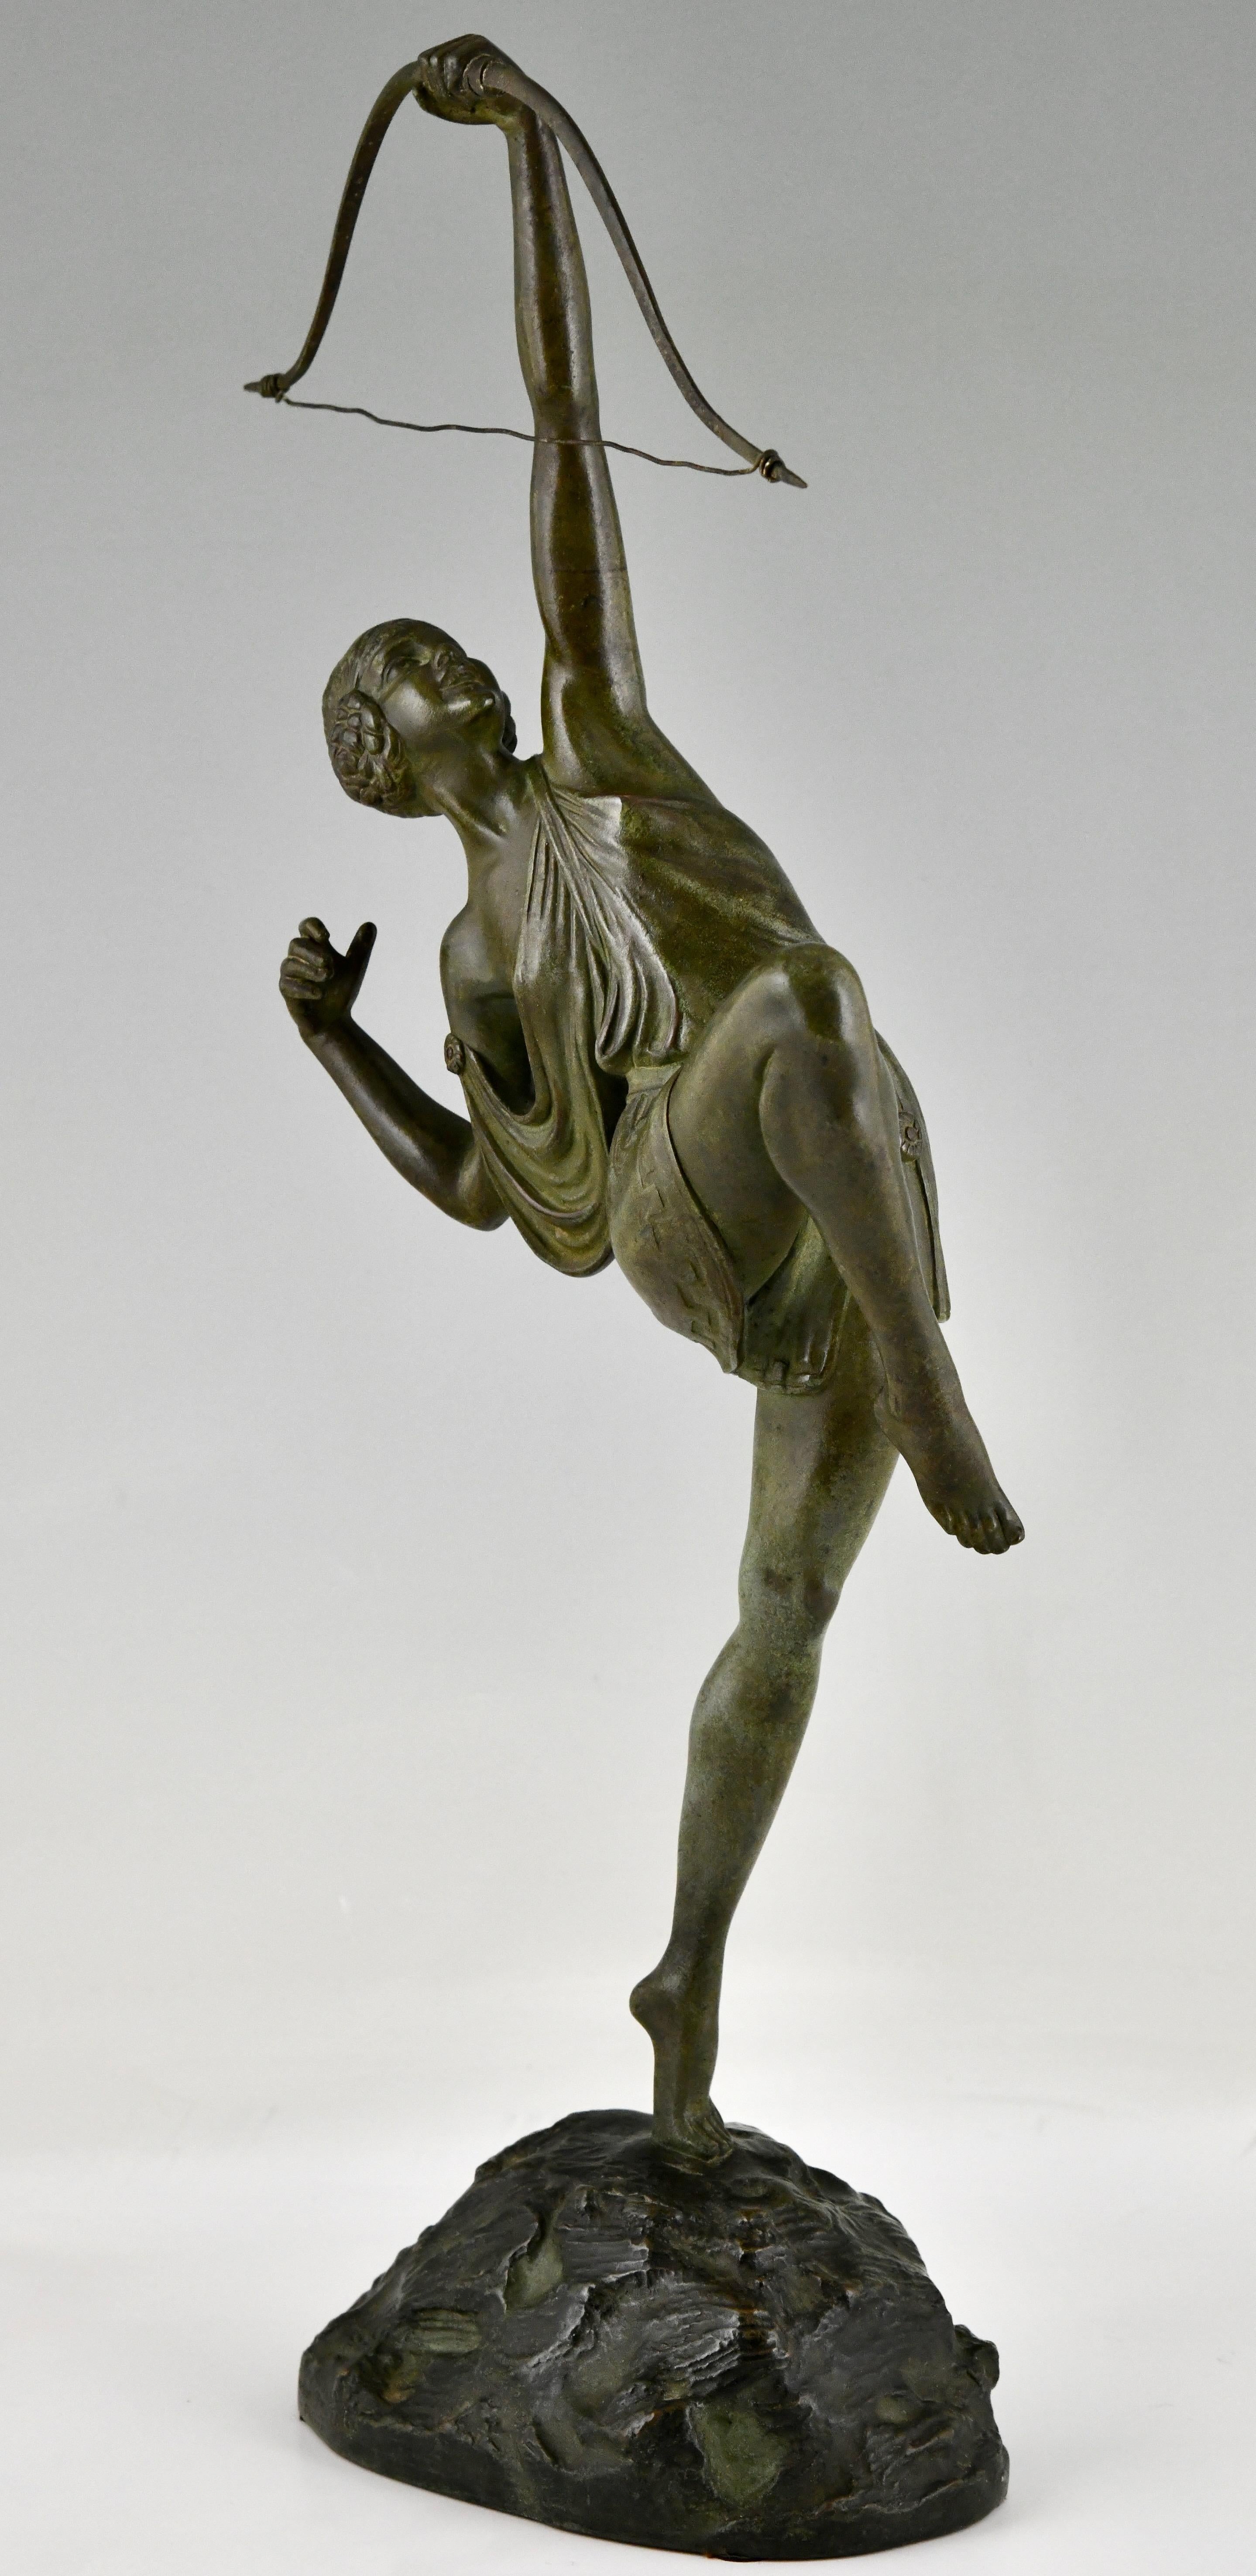 French Art Deco Bronze Sculpture Diana Woman with Bow by Pierre Le Faguays 1925